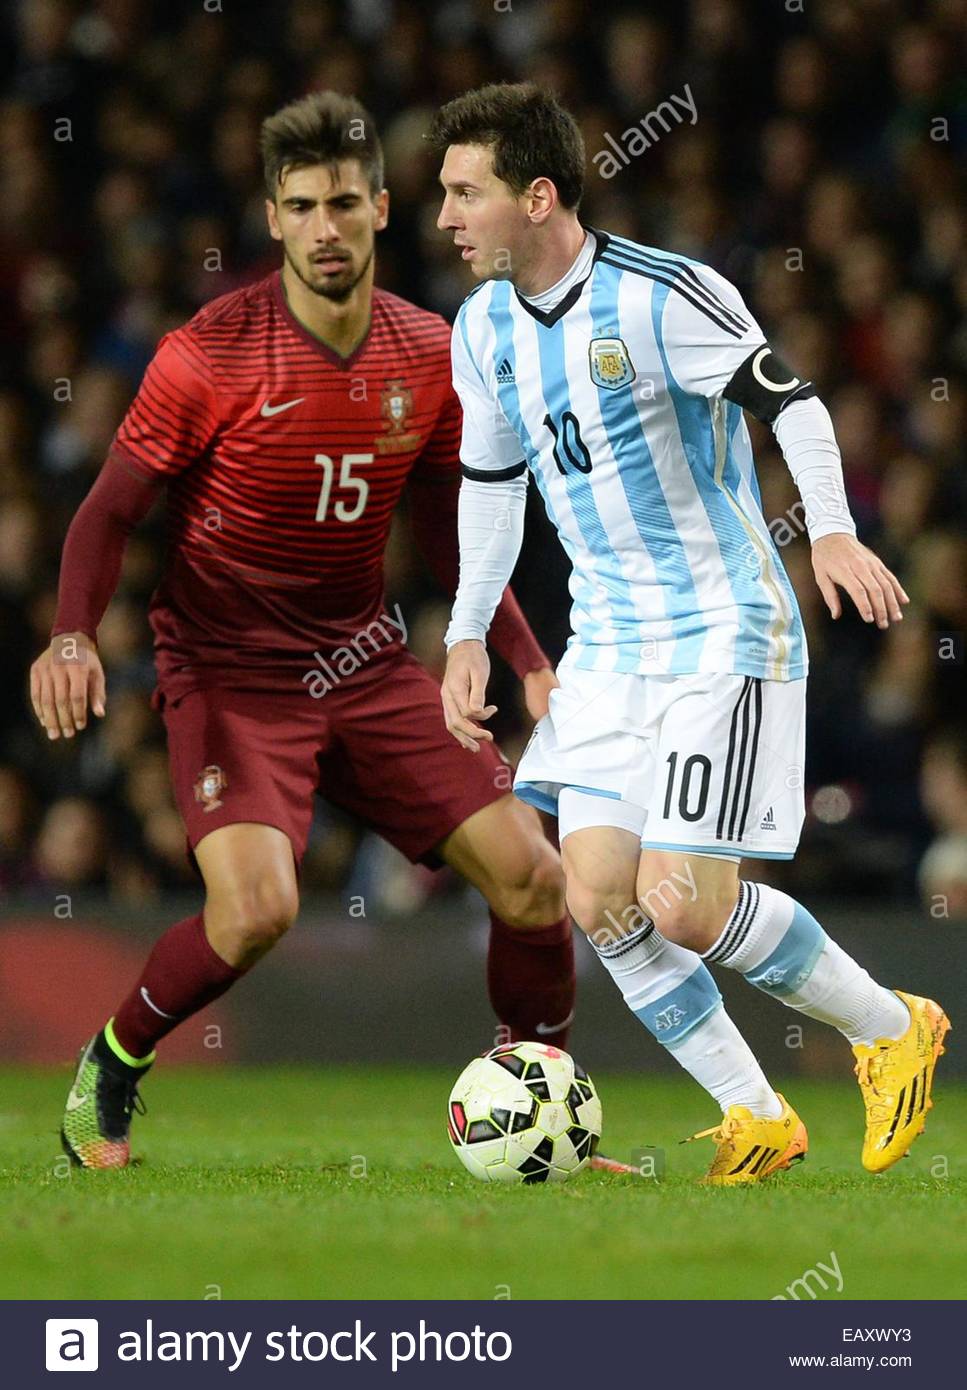 http://c8.alamy.com/comp/EAXWY3/epa04494978-argentinas-lionel-messi-r-goes-past-portugals-andre-gomes-EAXWY3.jpg